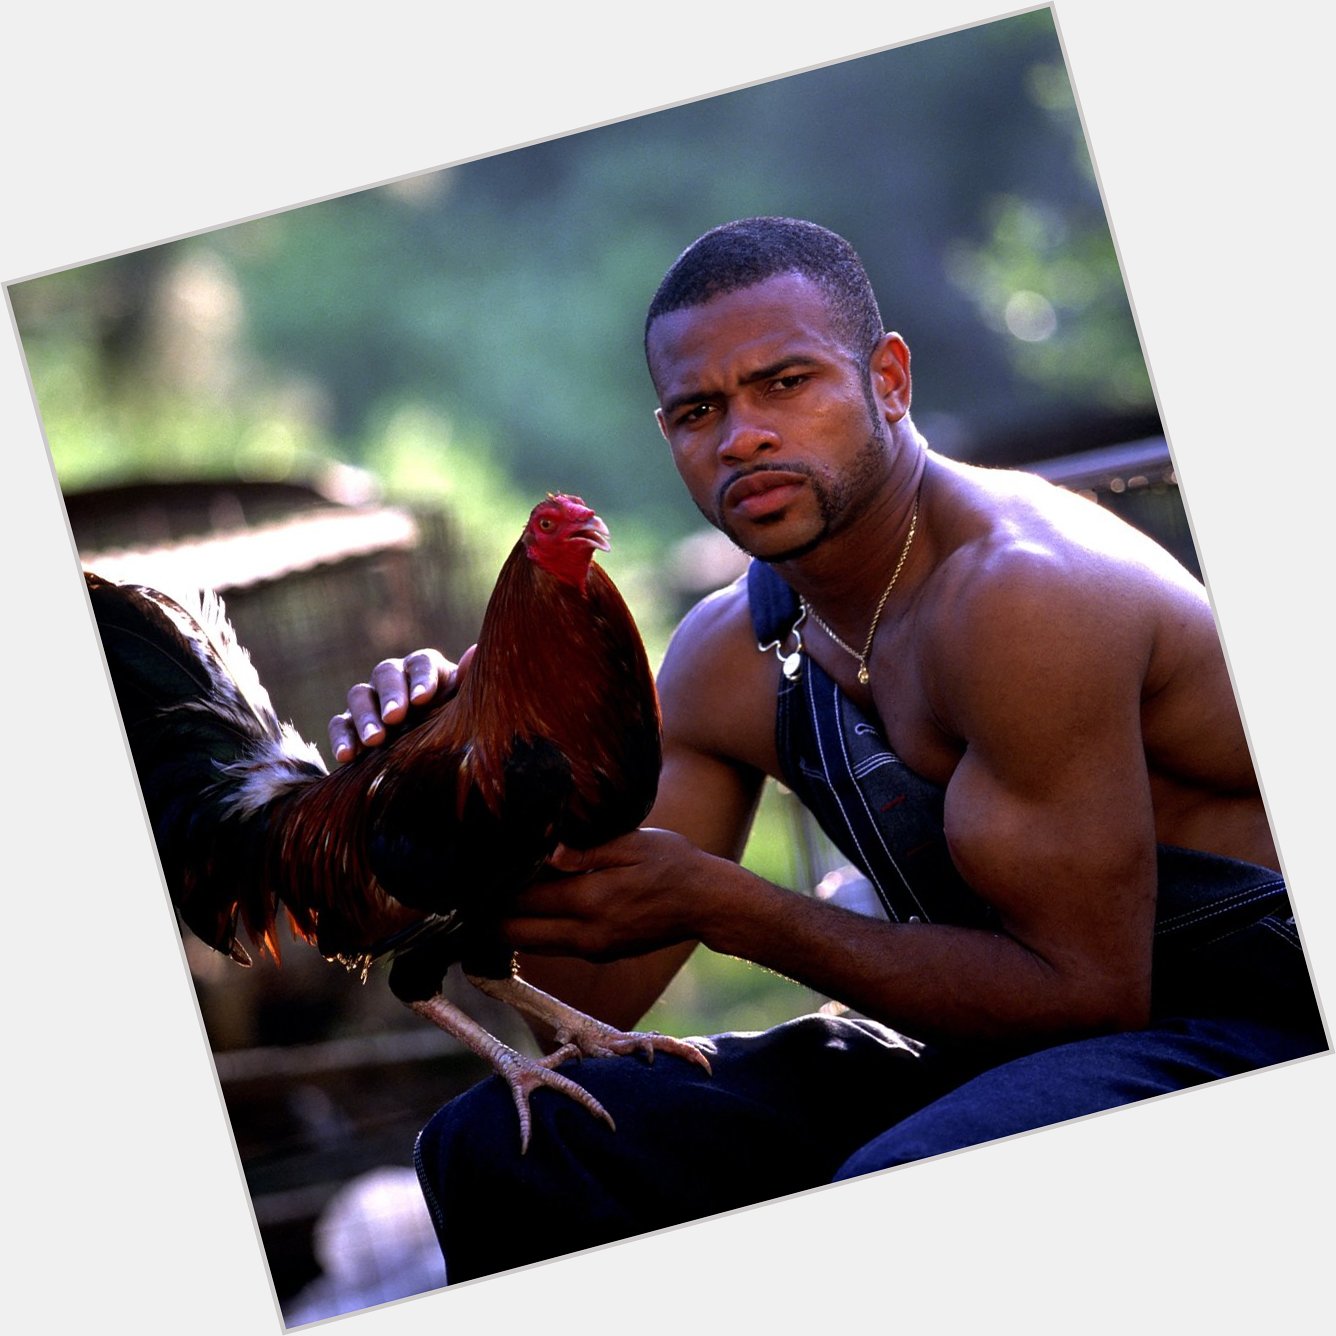 Happy Birthday to boxing legend Roy Jones Jr. and his photoshoot in dungarees holding a rooster. 